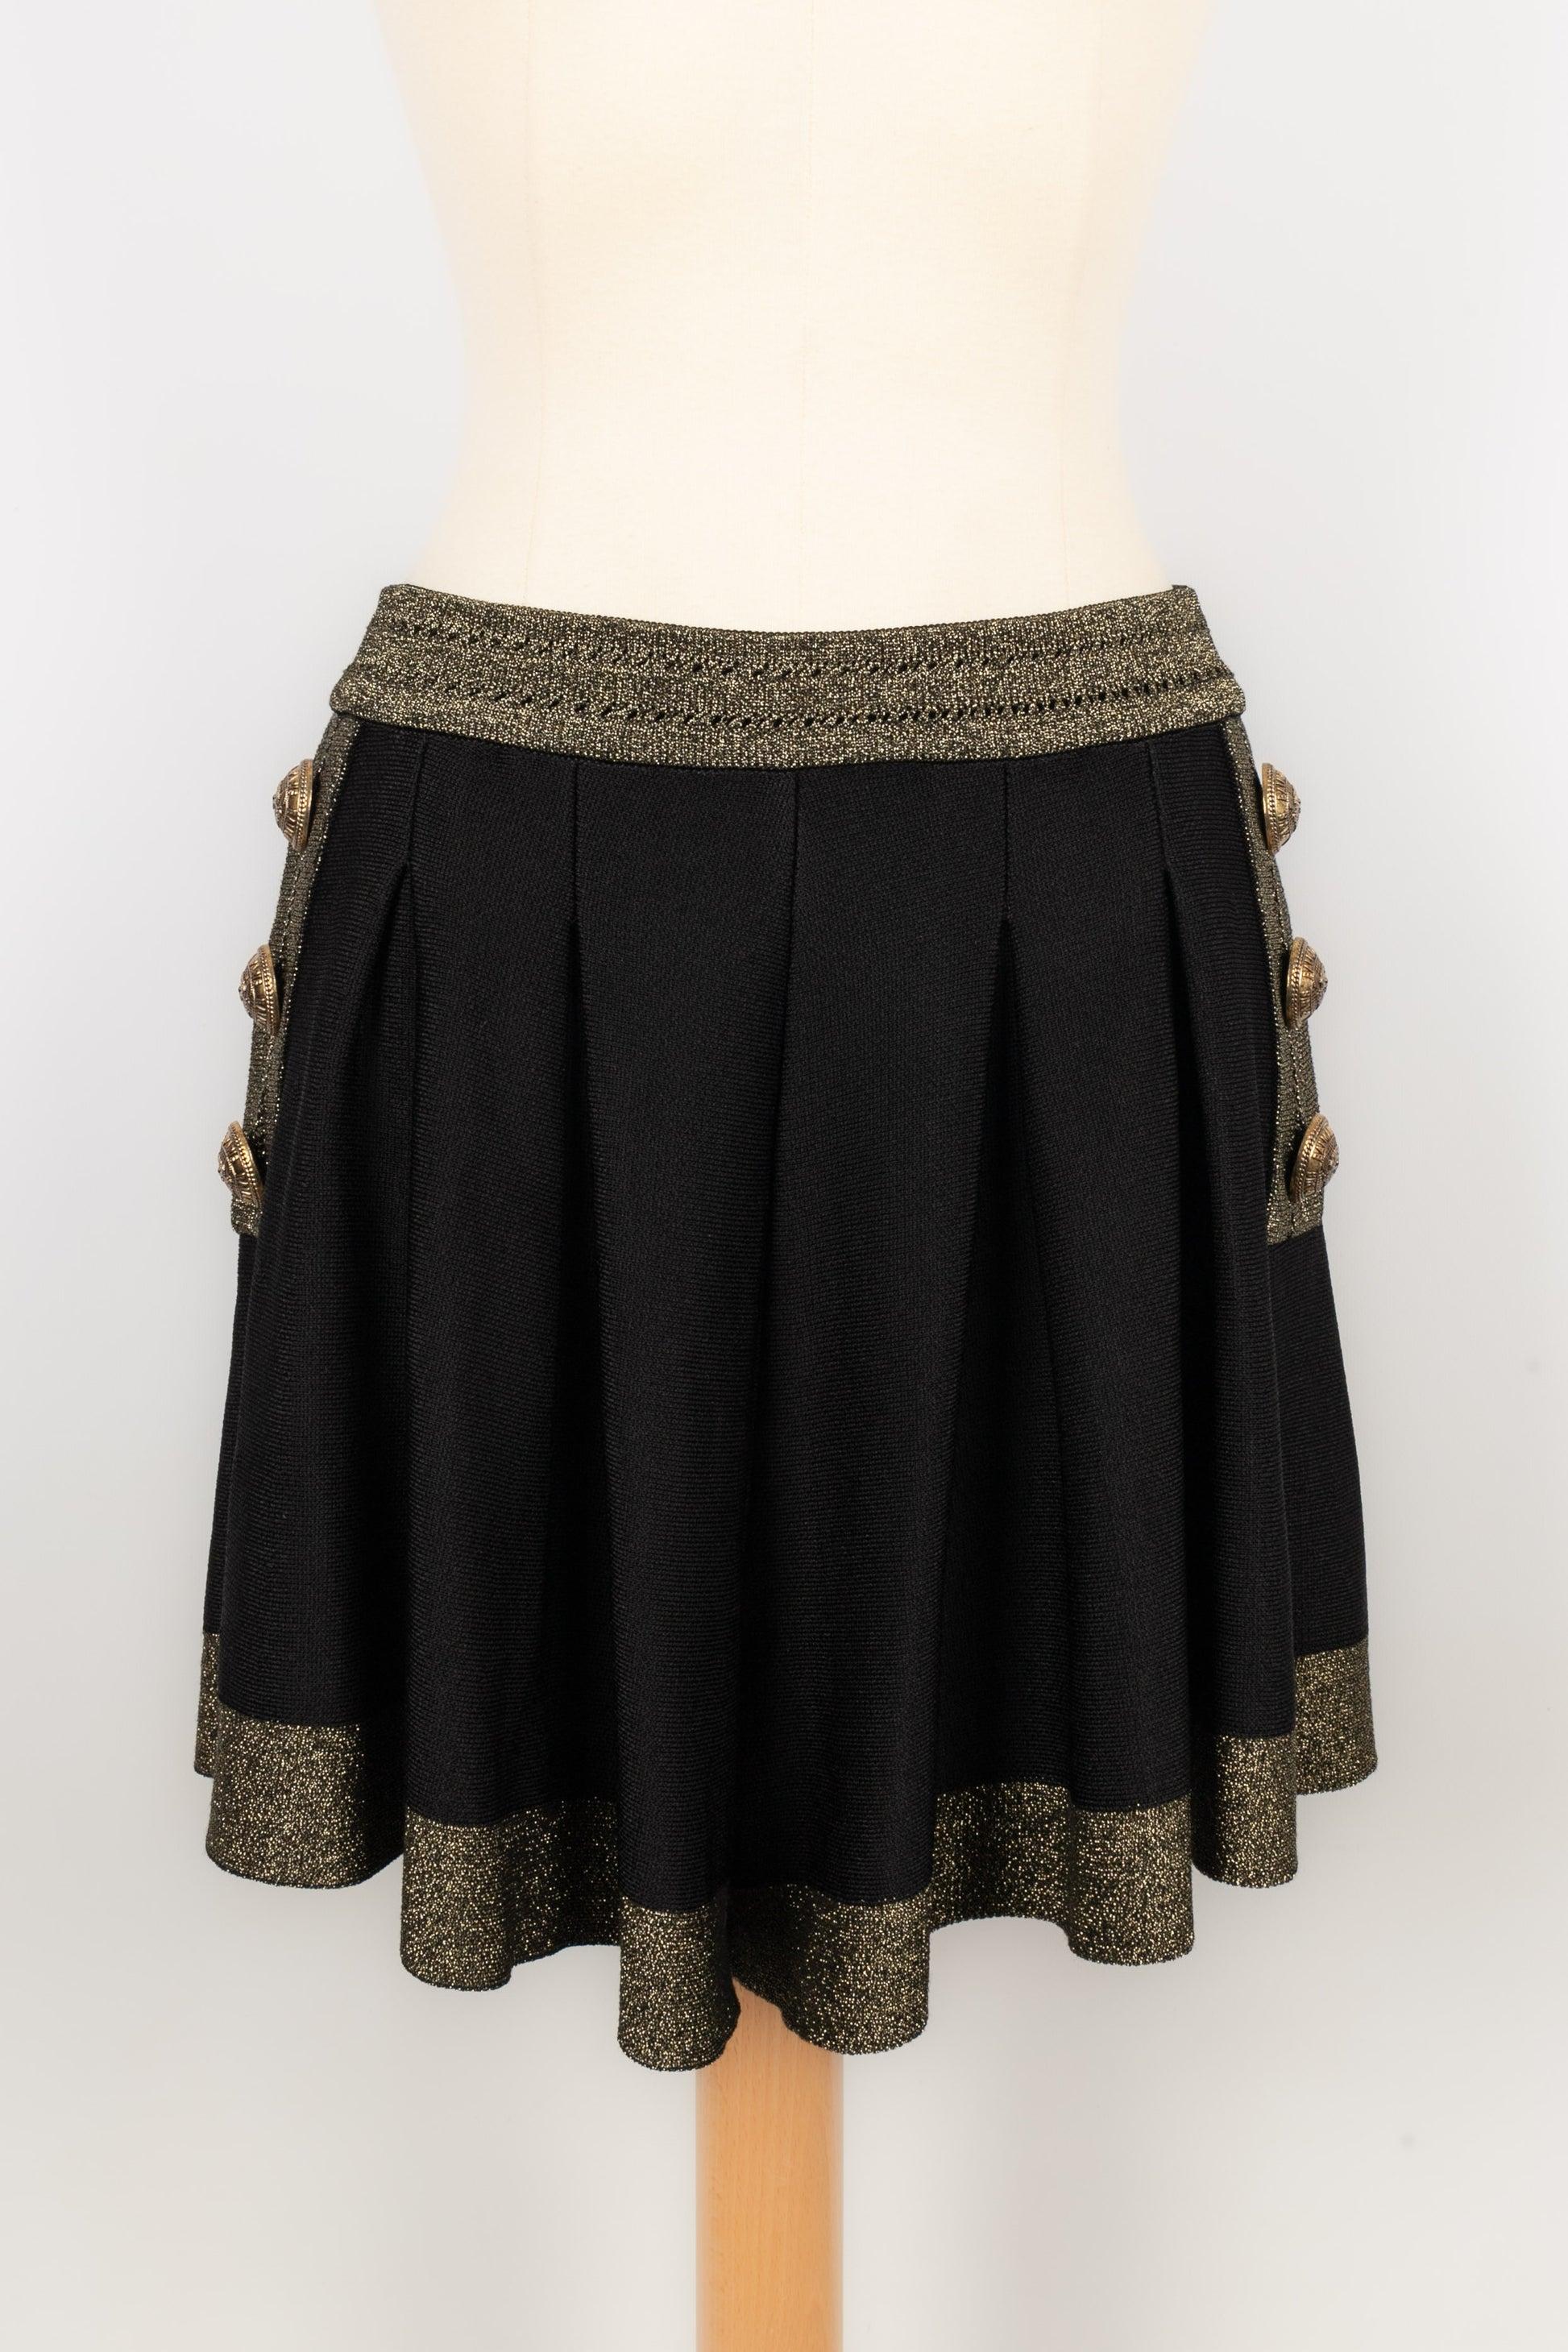 Balmain Set Composed of Shorts and a Black Top Edged with Golden For Sale 5